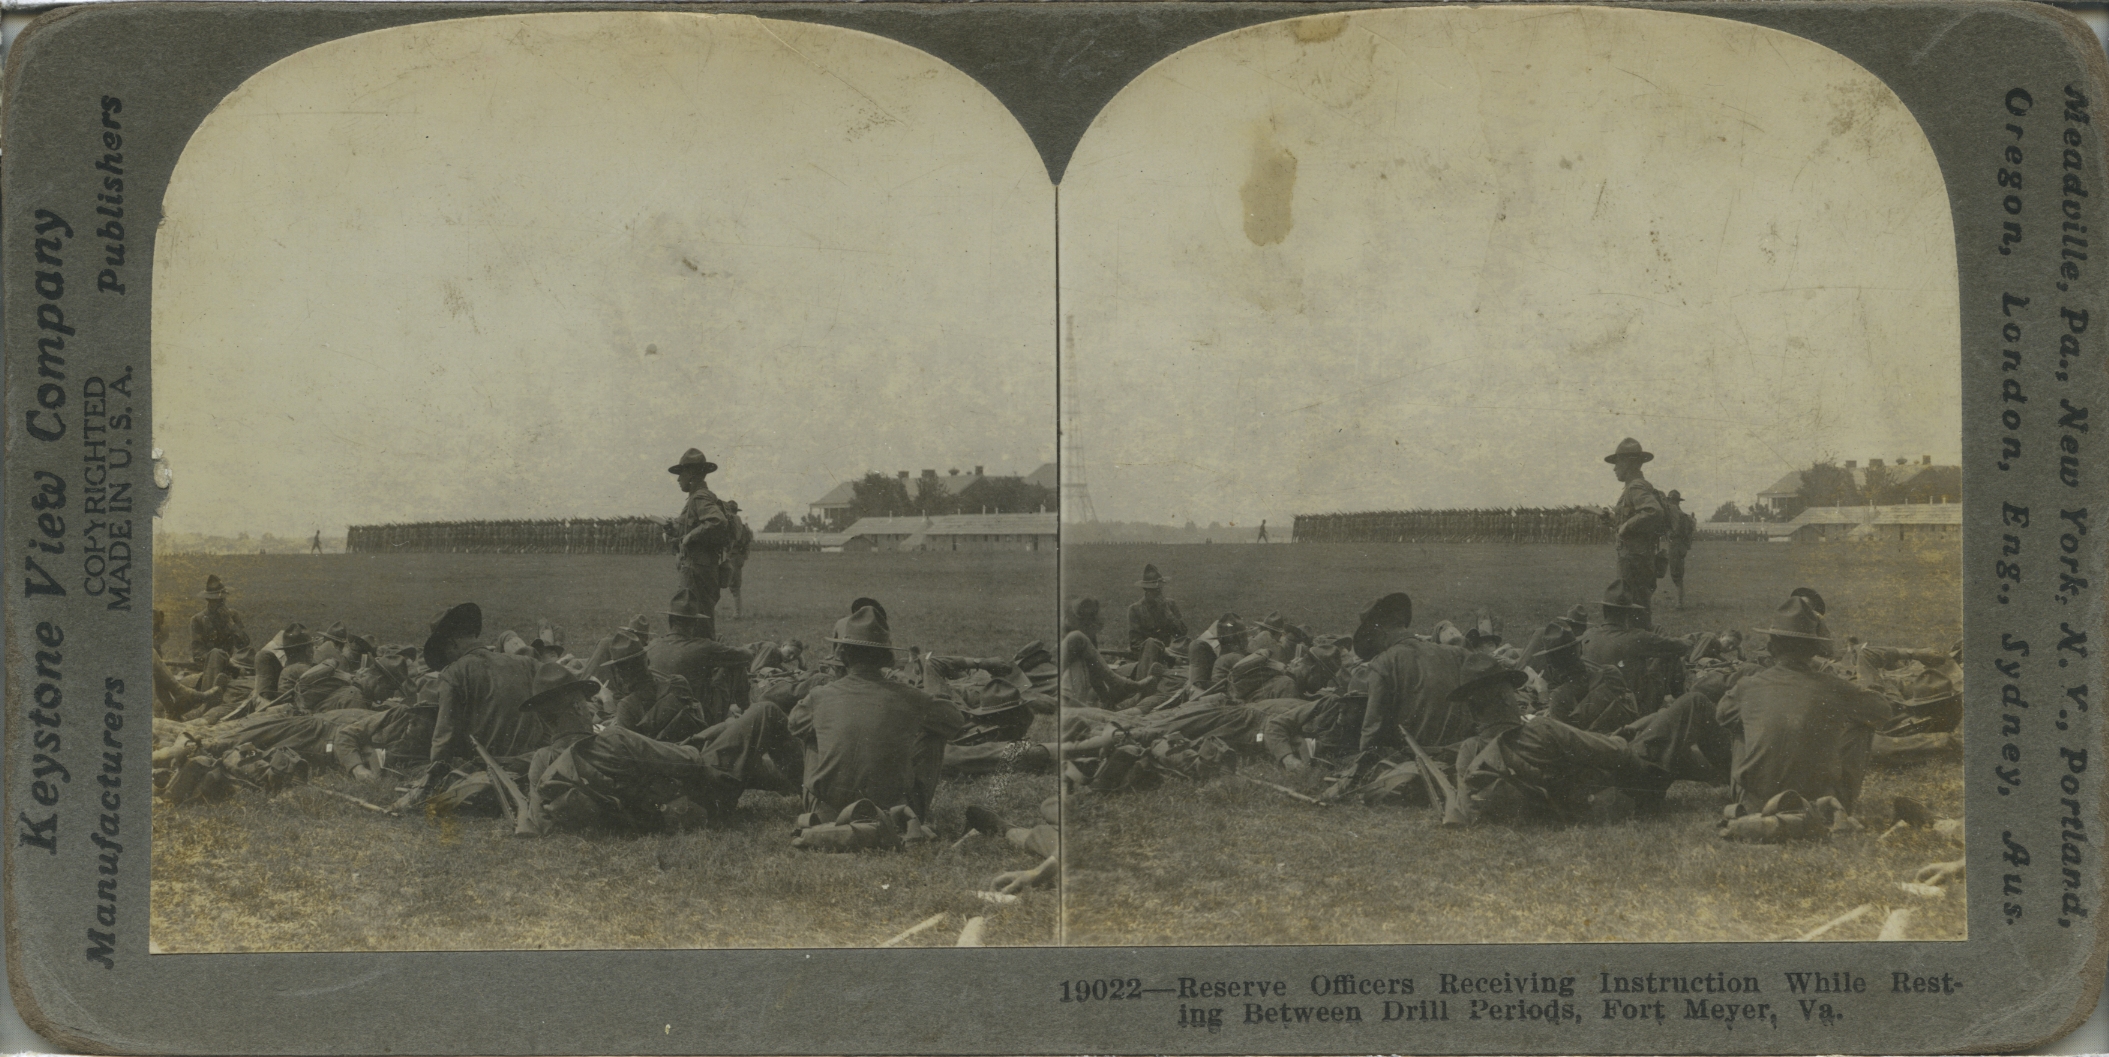 Reserve Officers Receiving InstructionWhile Resting Between Drill Periods, Fort Meyer, Va.